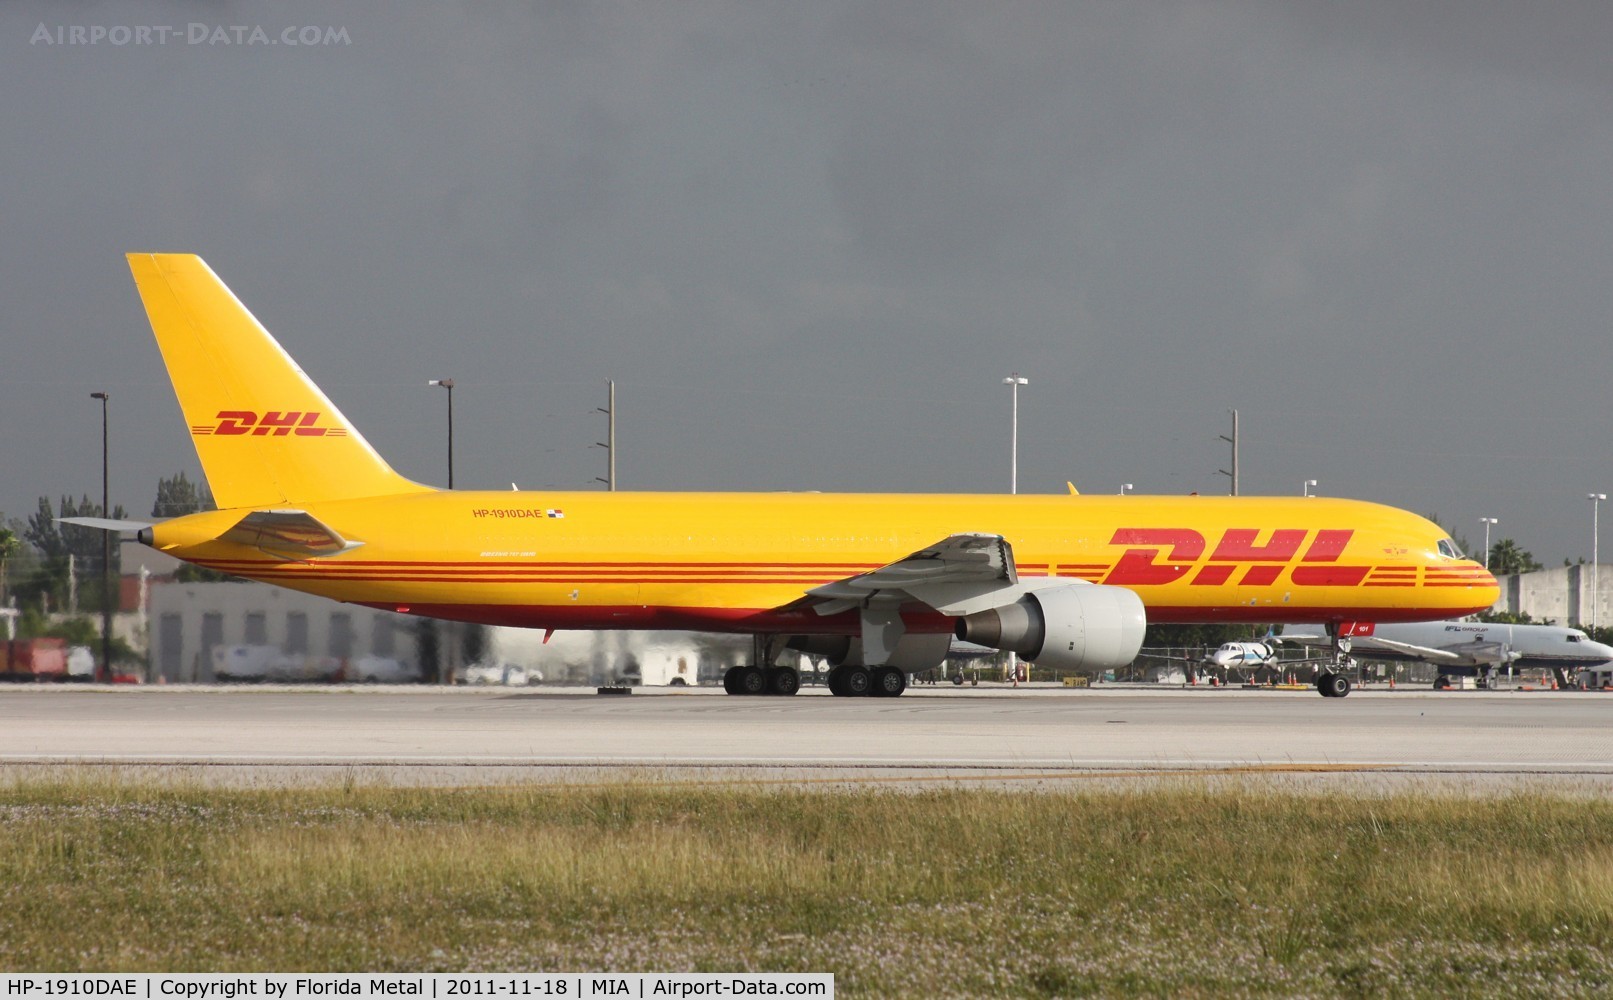 HP-1910DAE, 1998 Boeing 757-200 C/N 29607, DHL Aero Expreso 757 doing the unusual, departing on Runway 8R due to runway 9 being closed for morning maintenance - taken from photo holes on 25th St.